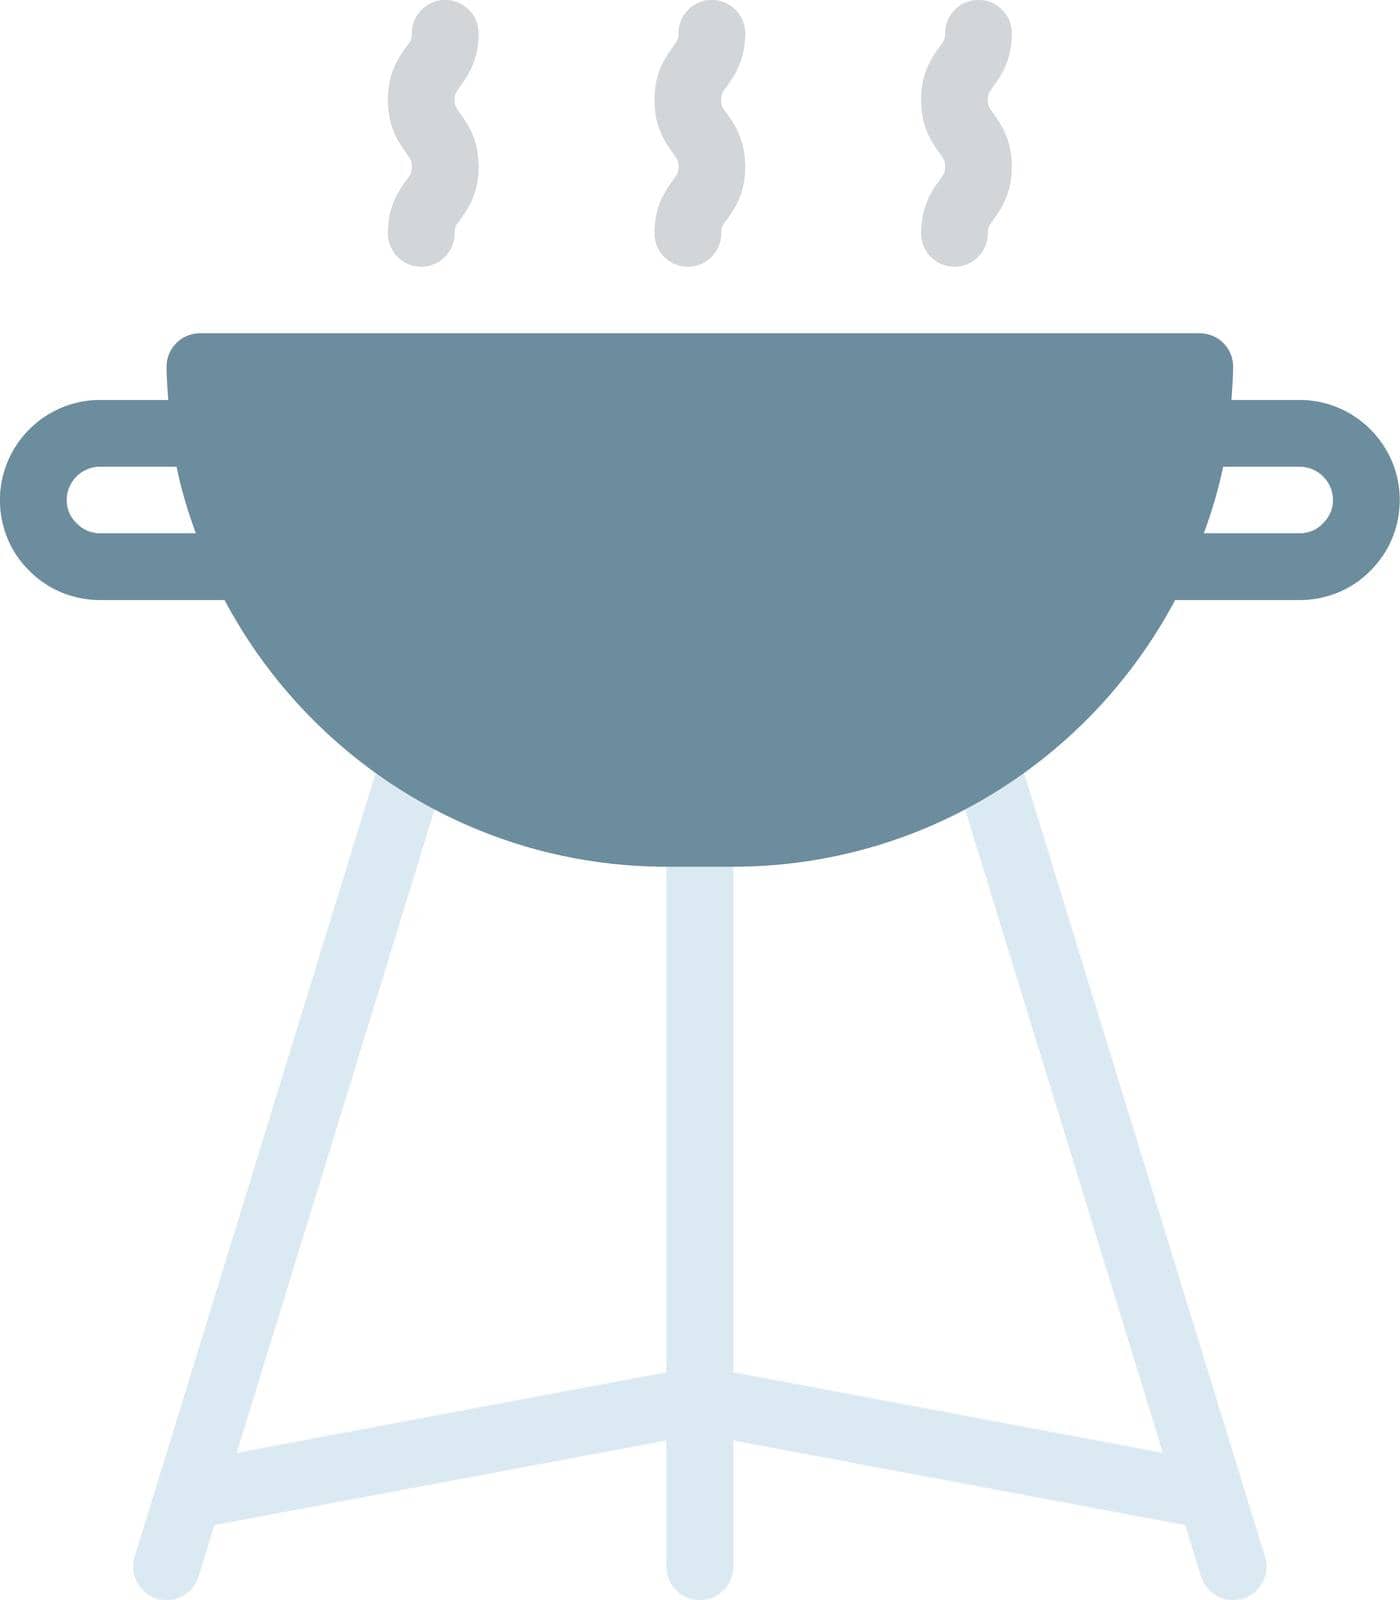 grill by FlaticonsDesign